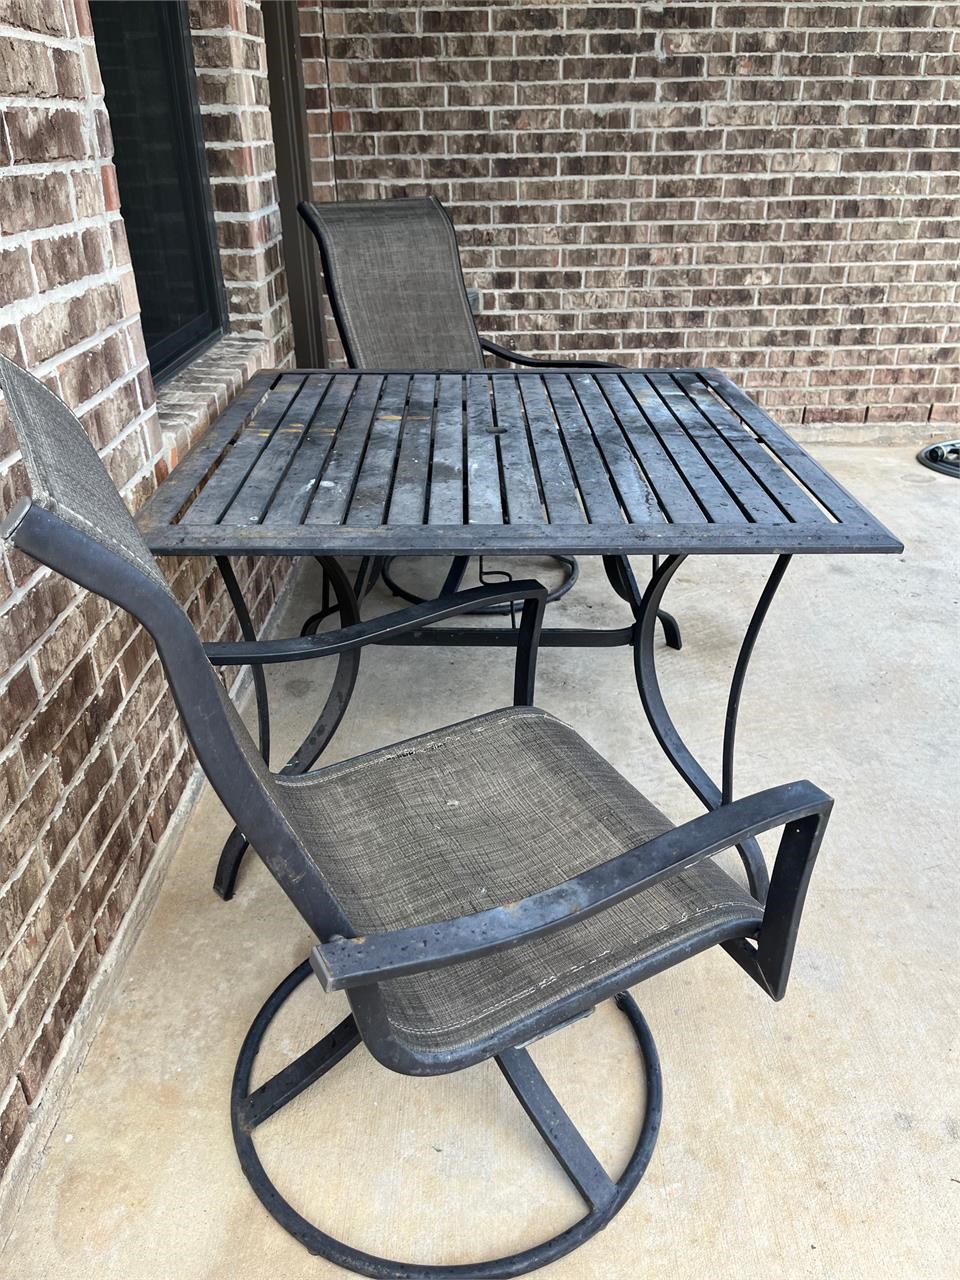 Outdoor Patio Table and Chairs